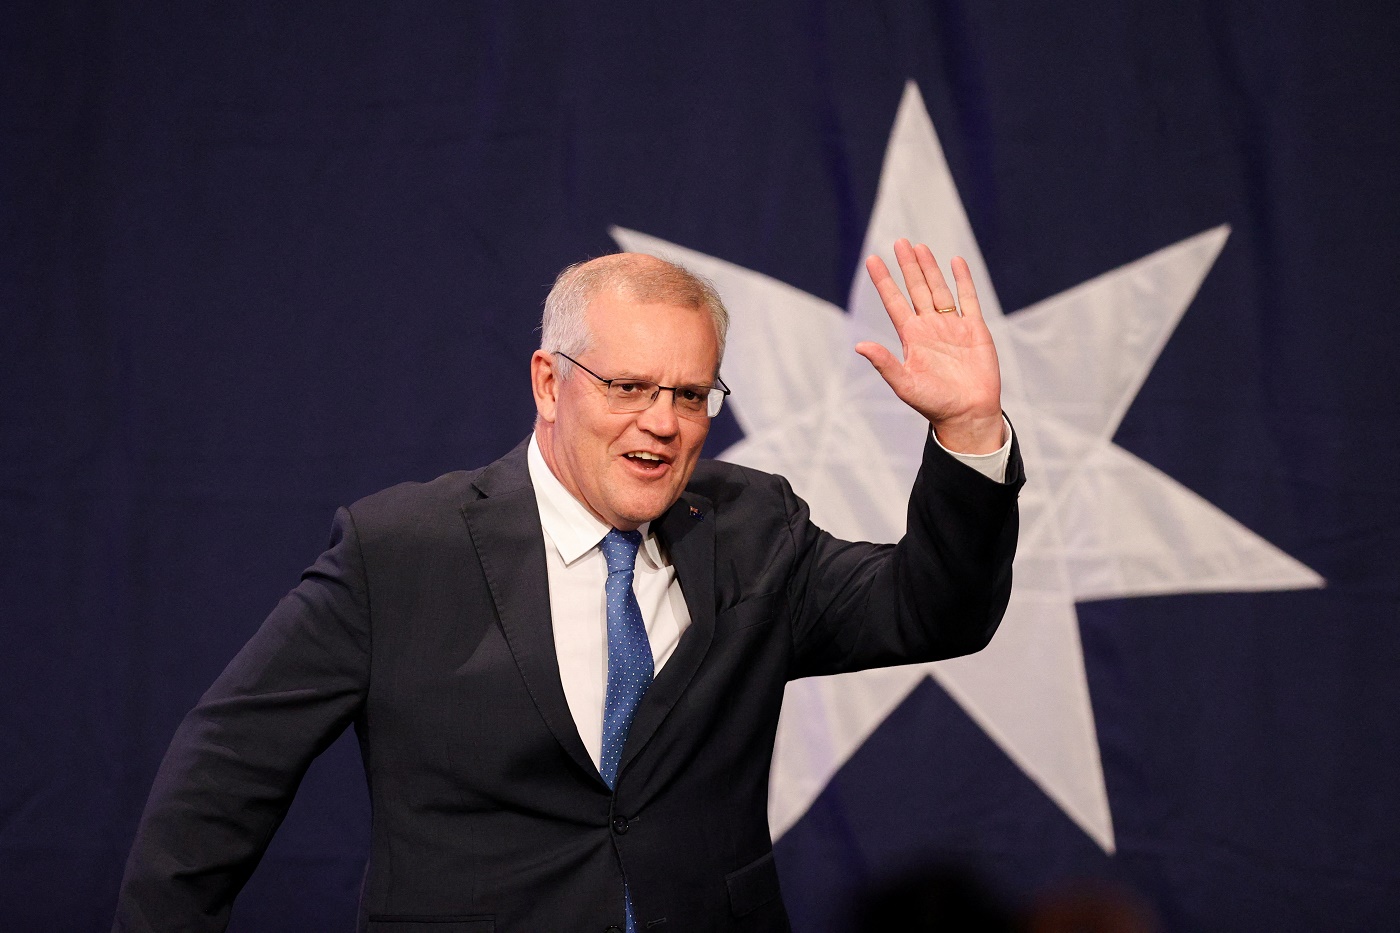 Australia: PM Morrison Facing Defeat in National Election